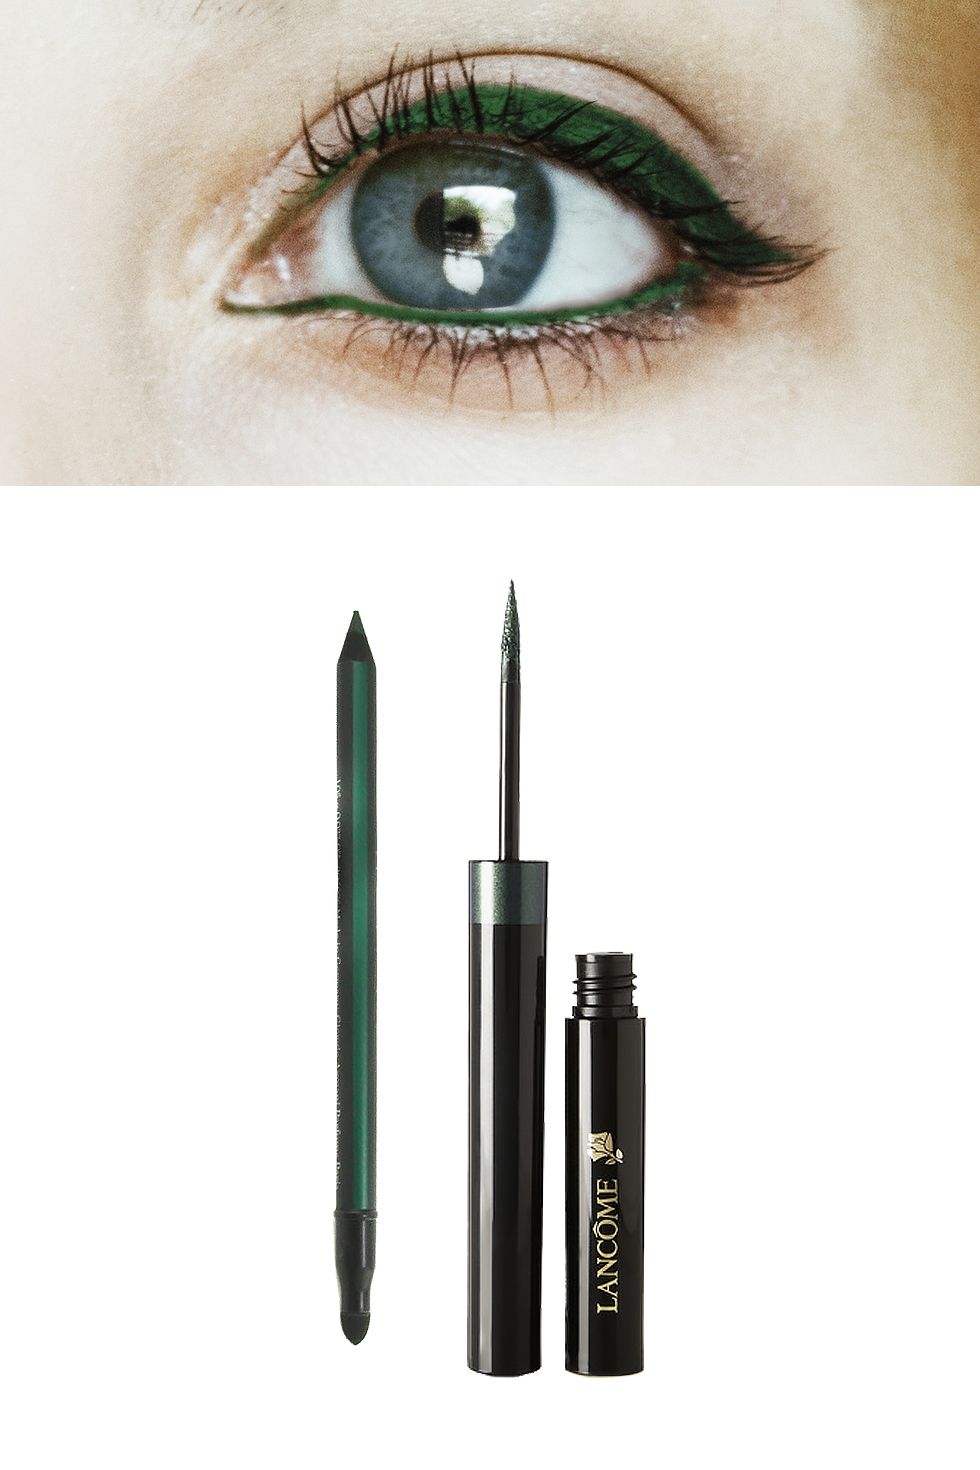 <p>Cool blue eyes will pop against a contrasting, yet complementary deep green emerald shade, which will accentuate flecks of gold that might be hiding.</p><p>Try Armani Smooth Silk Eye Pencil in Color 6<span class="redactor-invisible-space"> ($30) or <a href="Lancome Artliner 24H Bold Color Precision Eyeliner in Emerald 052" target="_blank">Lancome Artliner 24H Bold Color Precision Eyeliner in Emerald 052</a><span class="redactor-invisible-space"> ($31).</span><br></span></p>